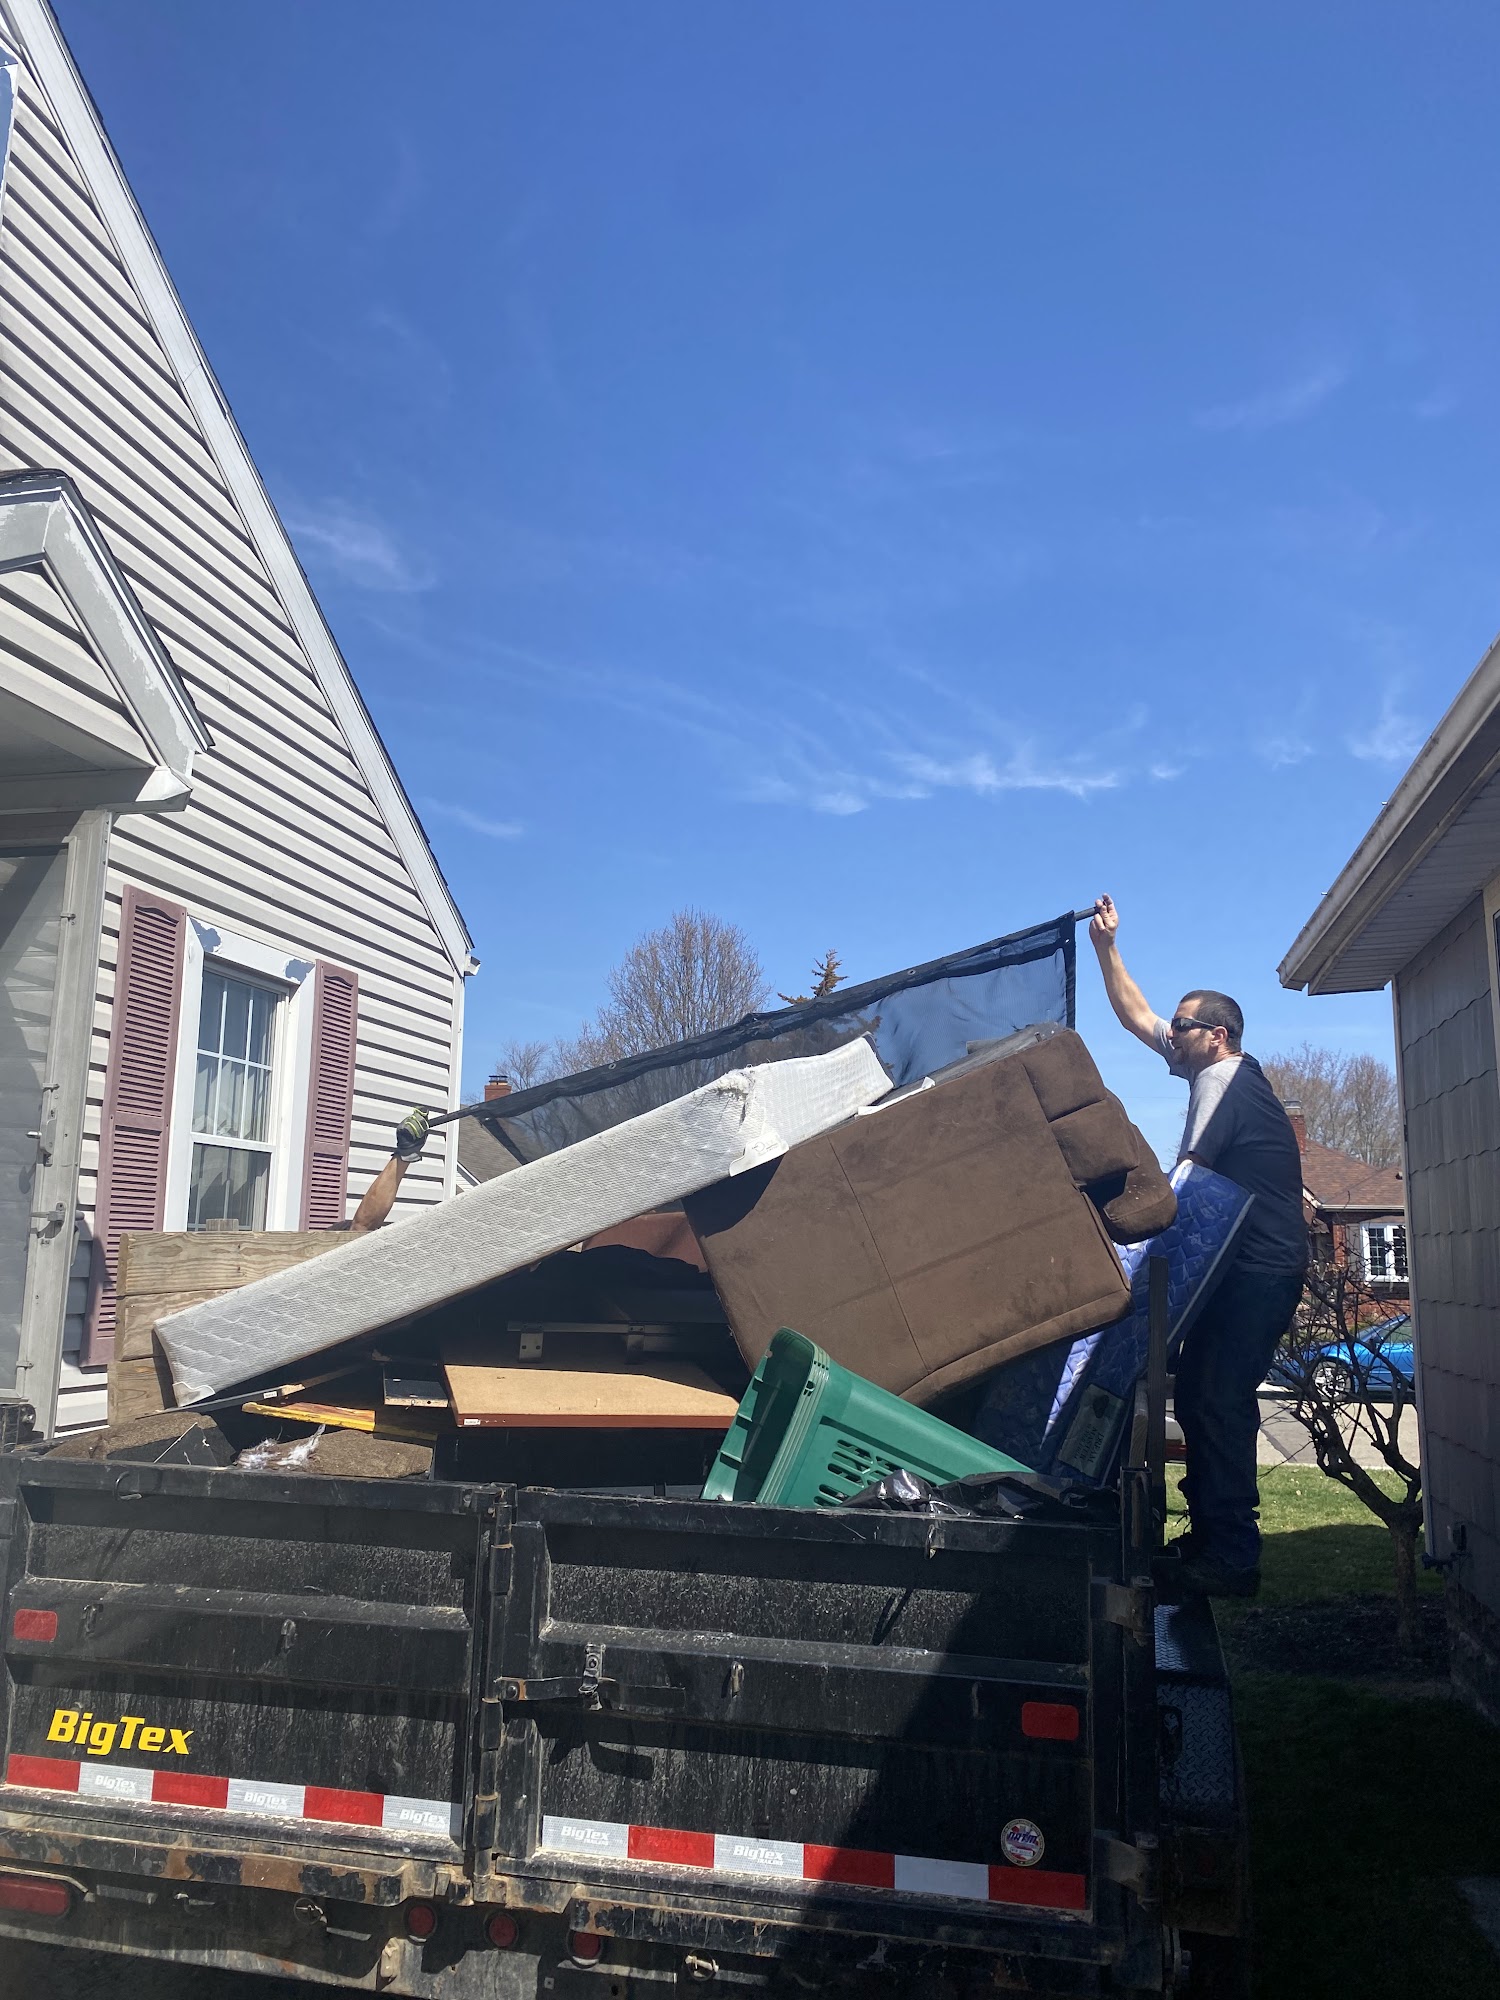 Keeton junk hauling Removal And more .LLC 423 Wiles Ln, Richmond Dale Ohio 45673